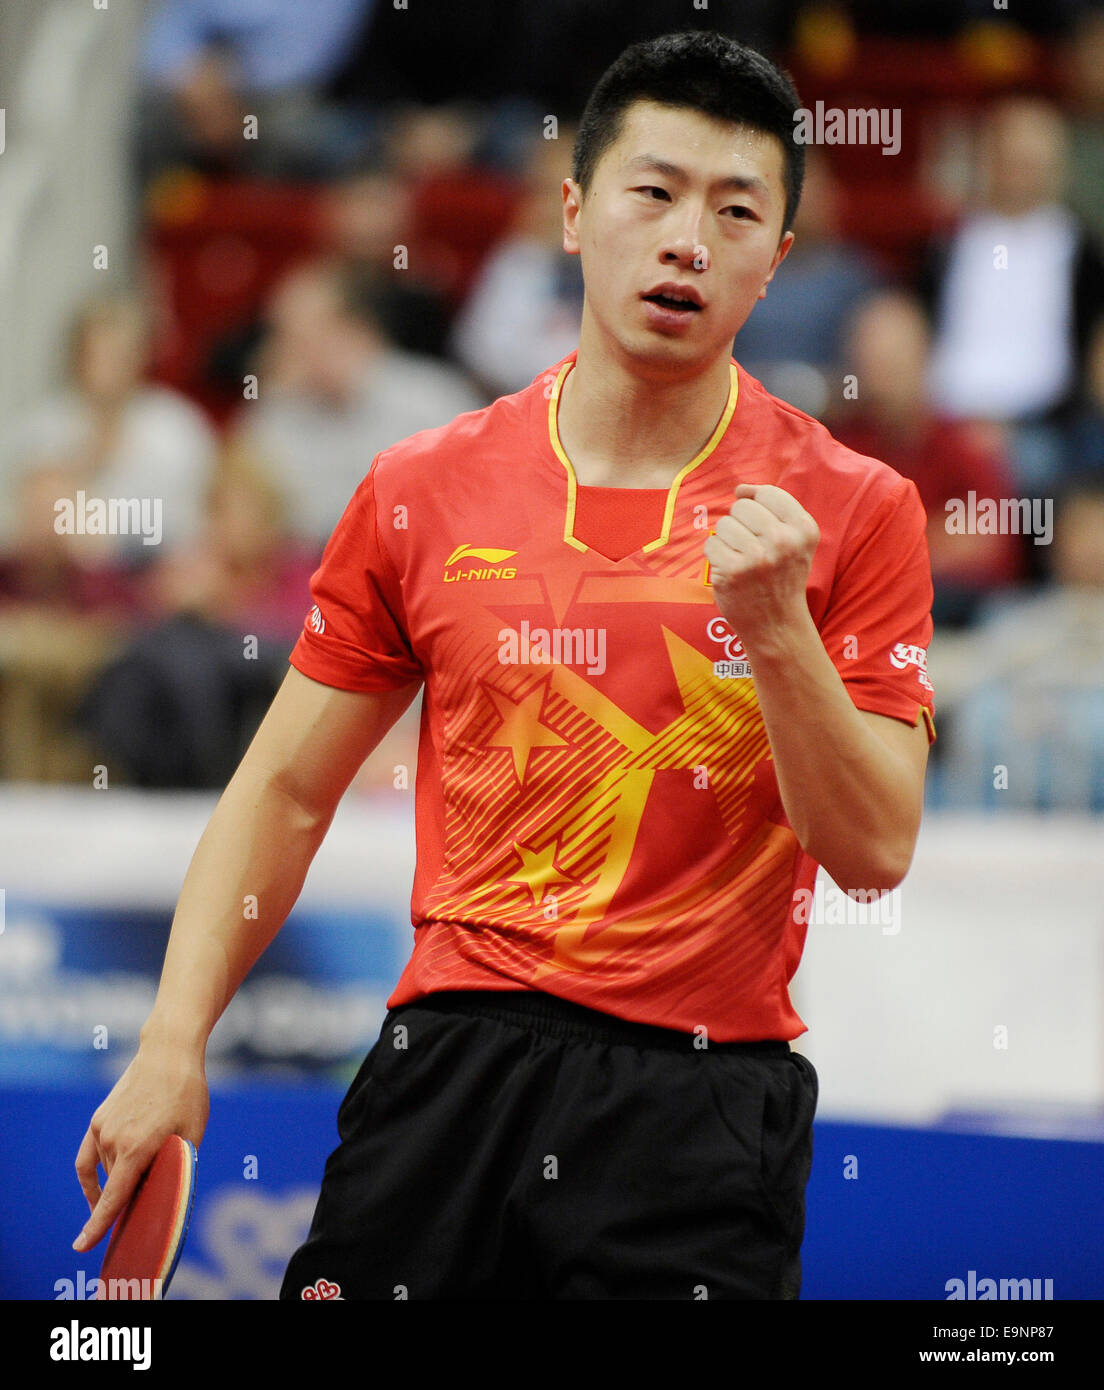 ISS Arena Duesseldorf, Germany 16.10.2014, Liebherr Tabletennis World Cup ,  Ma Long (CHN) Stock Photo